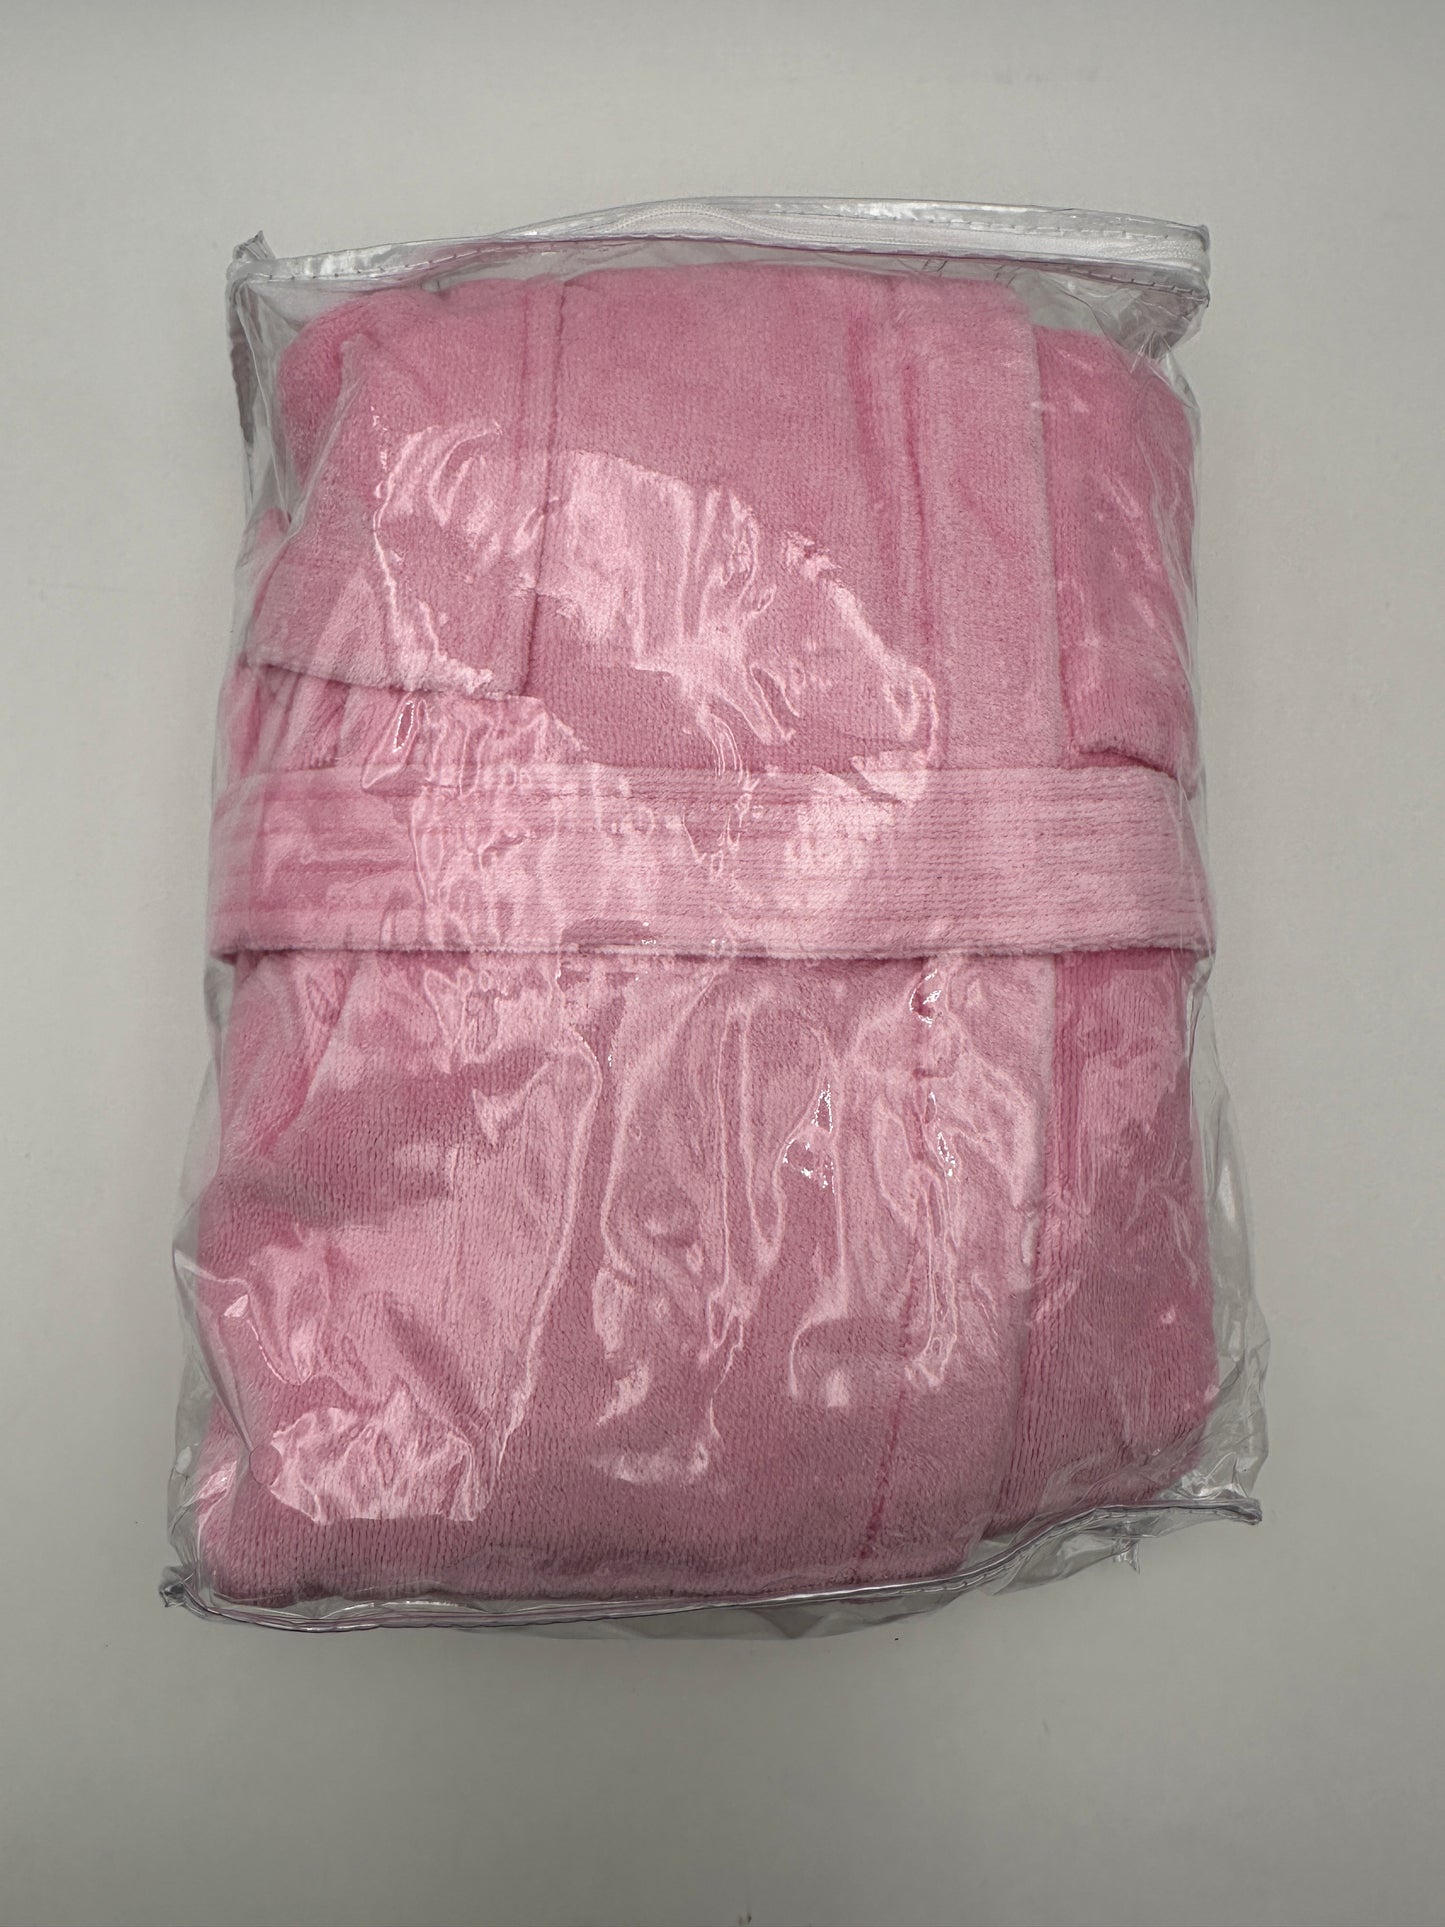 Parador Kids Size L Pink Terry Velour Hooded Robe Cover Up, new in package